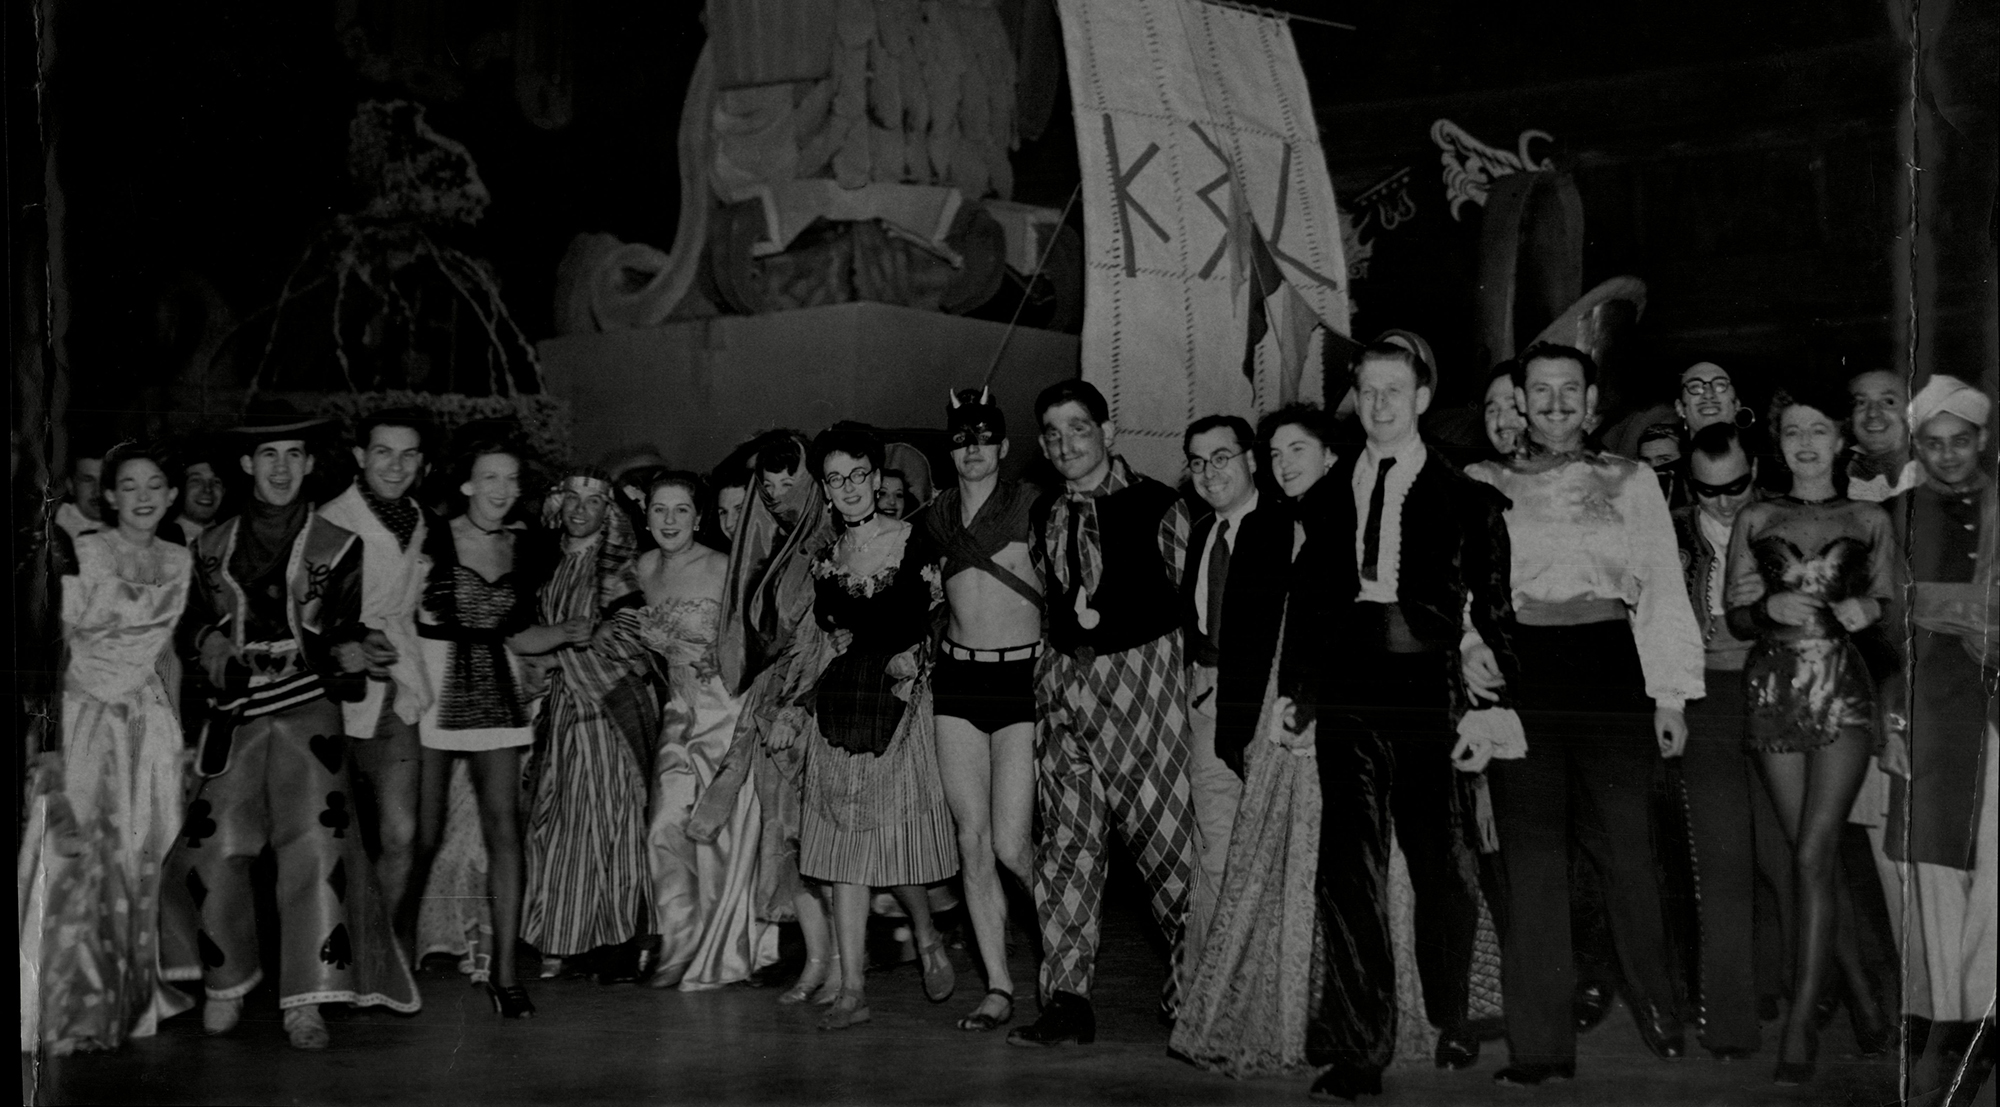 Posed group photo of partygoers in fancy dress at Chelsea Arts Ball at the Royal Albert Hall, New Year's Eve 1946